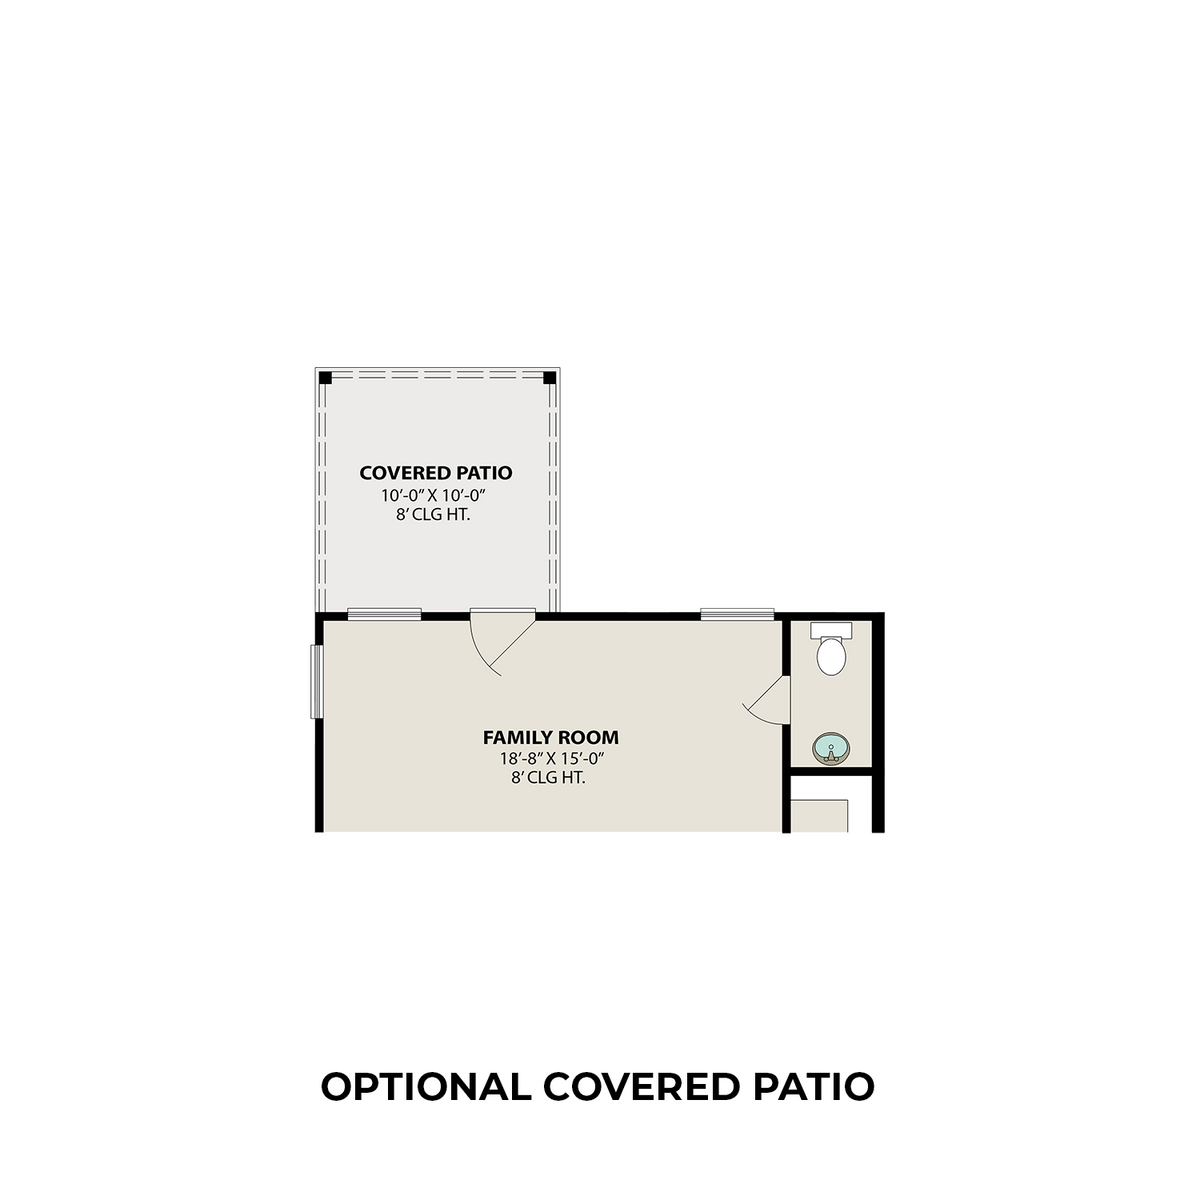 3 - The Lily B floor plan layout for 5259 Shallowhurst Lane in Davidson Homes' Haven at Kieth Harrow community.